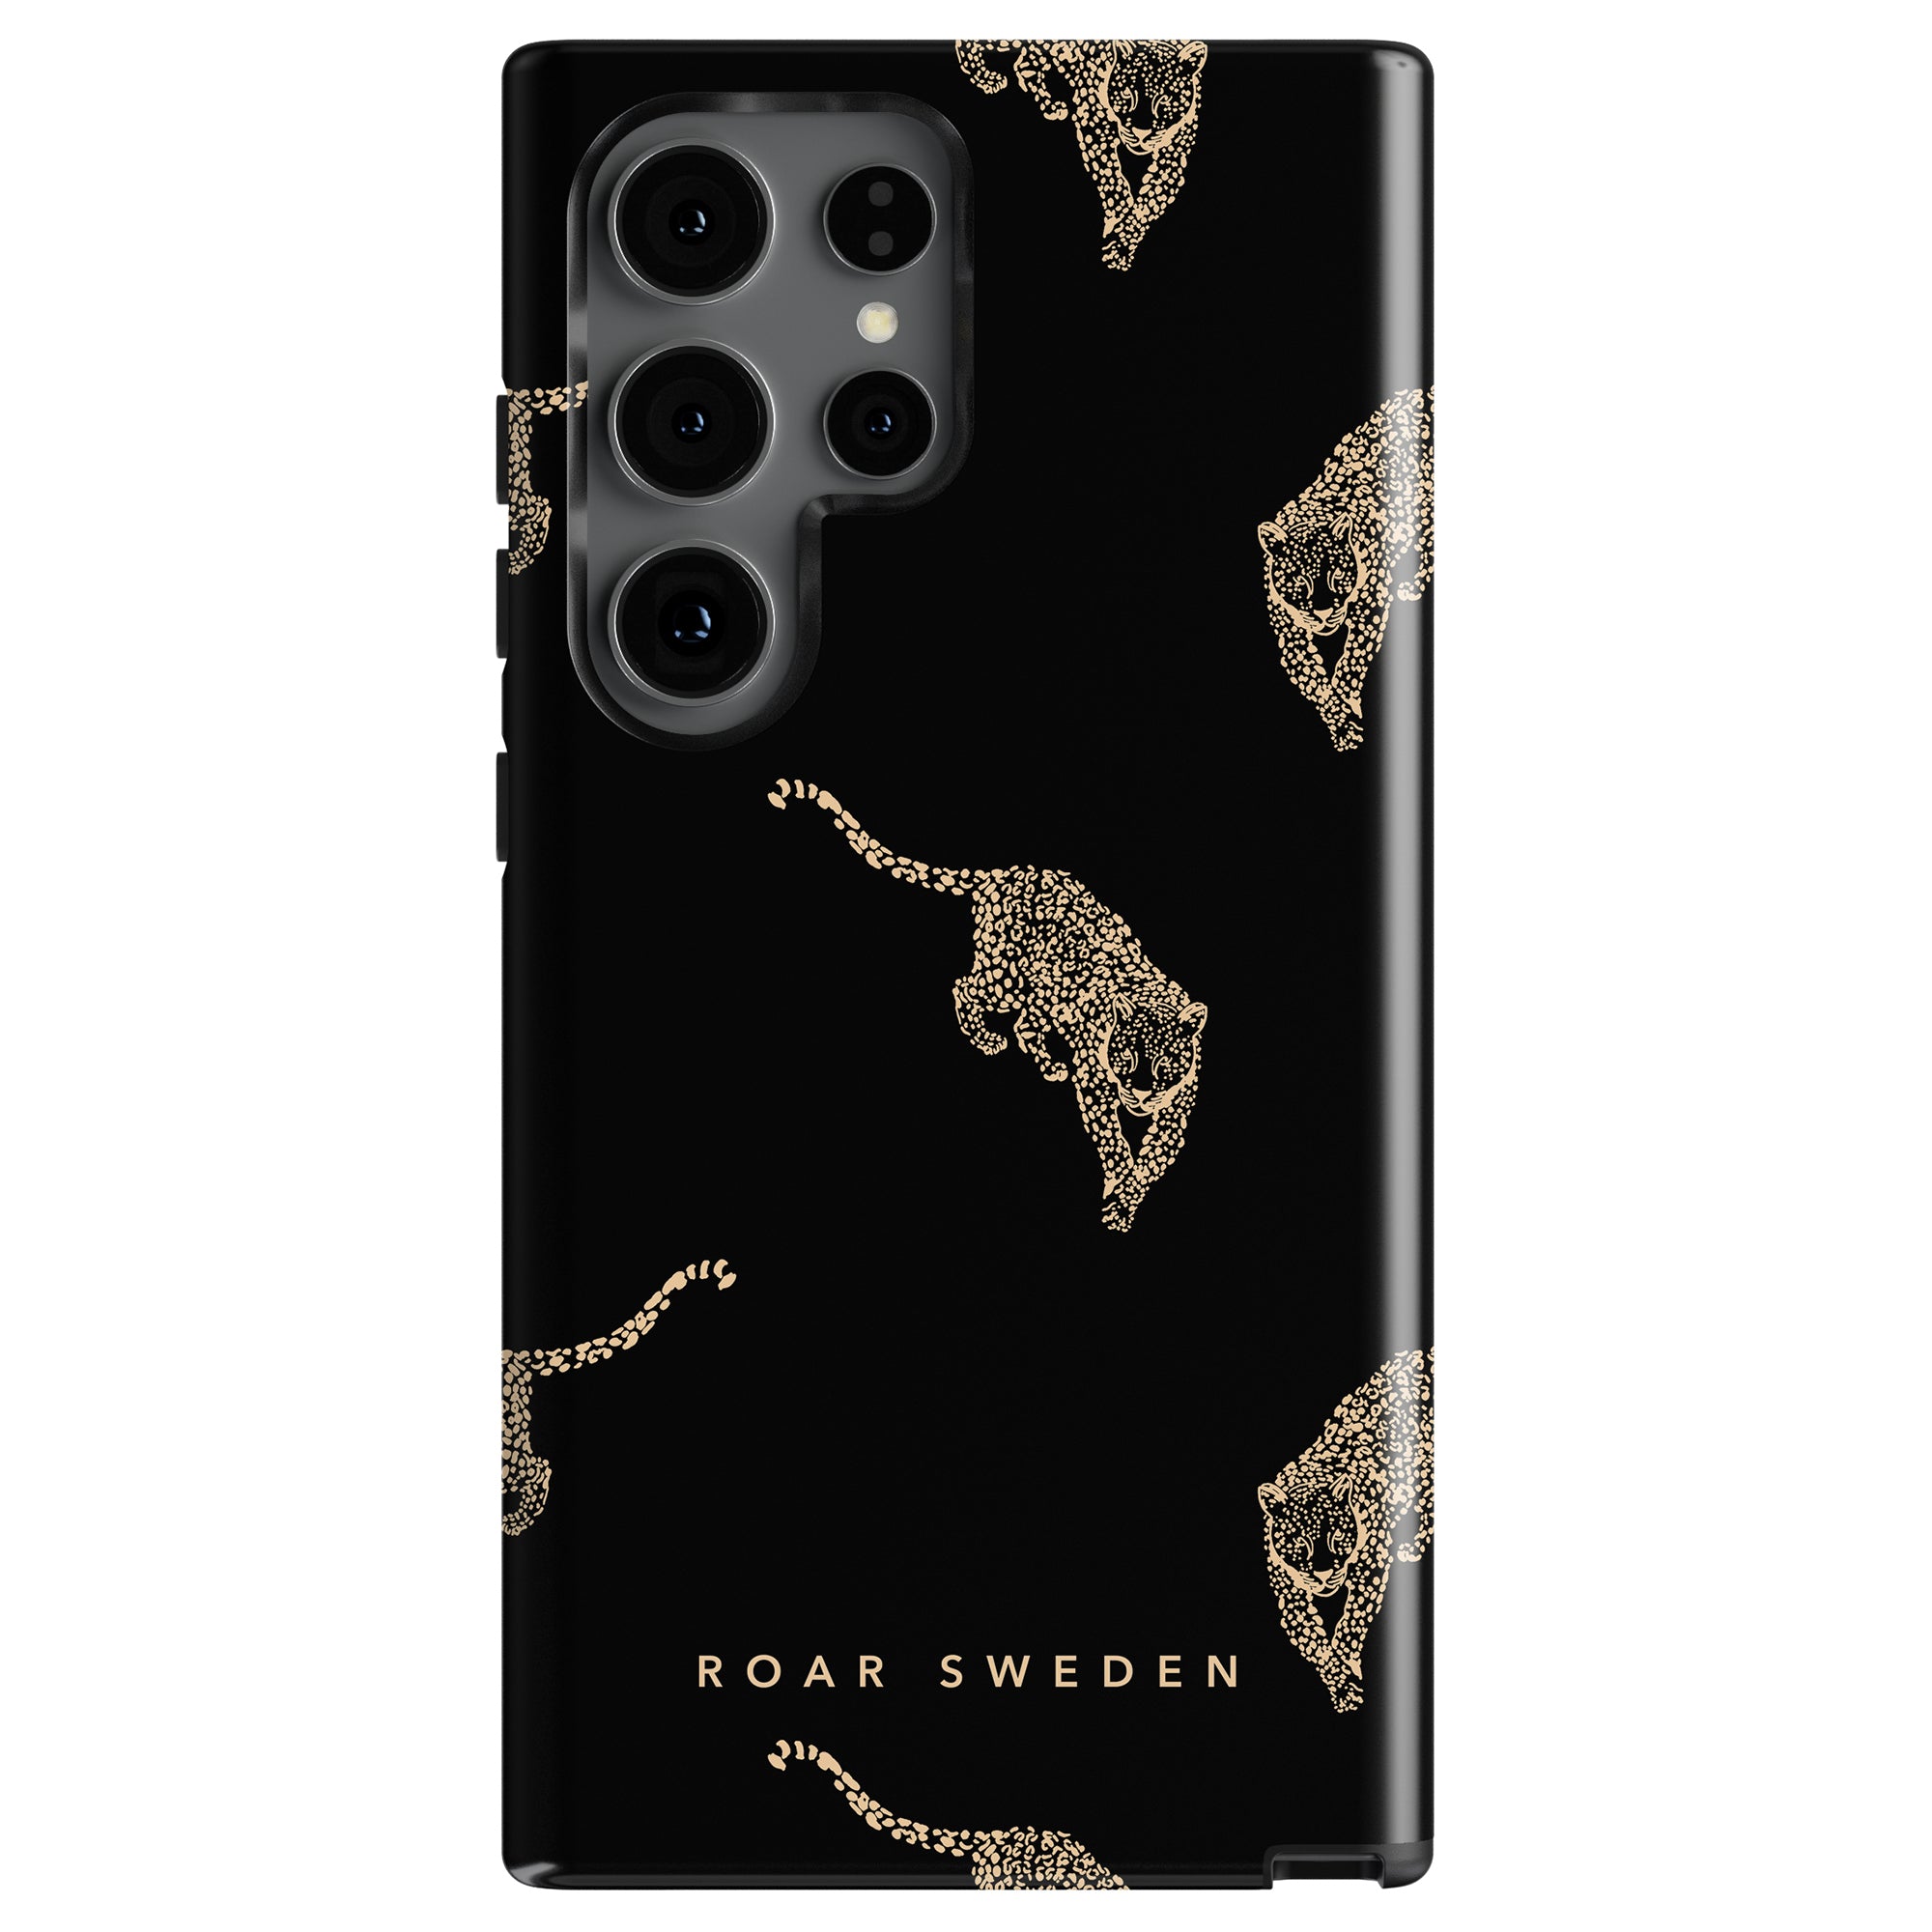 Black smartphone case with a pattern of golden leopard prints and text "Kitty Black - Tough Case" near the bottom, designed for a model with four camera lenses.